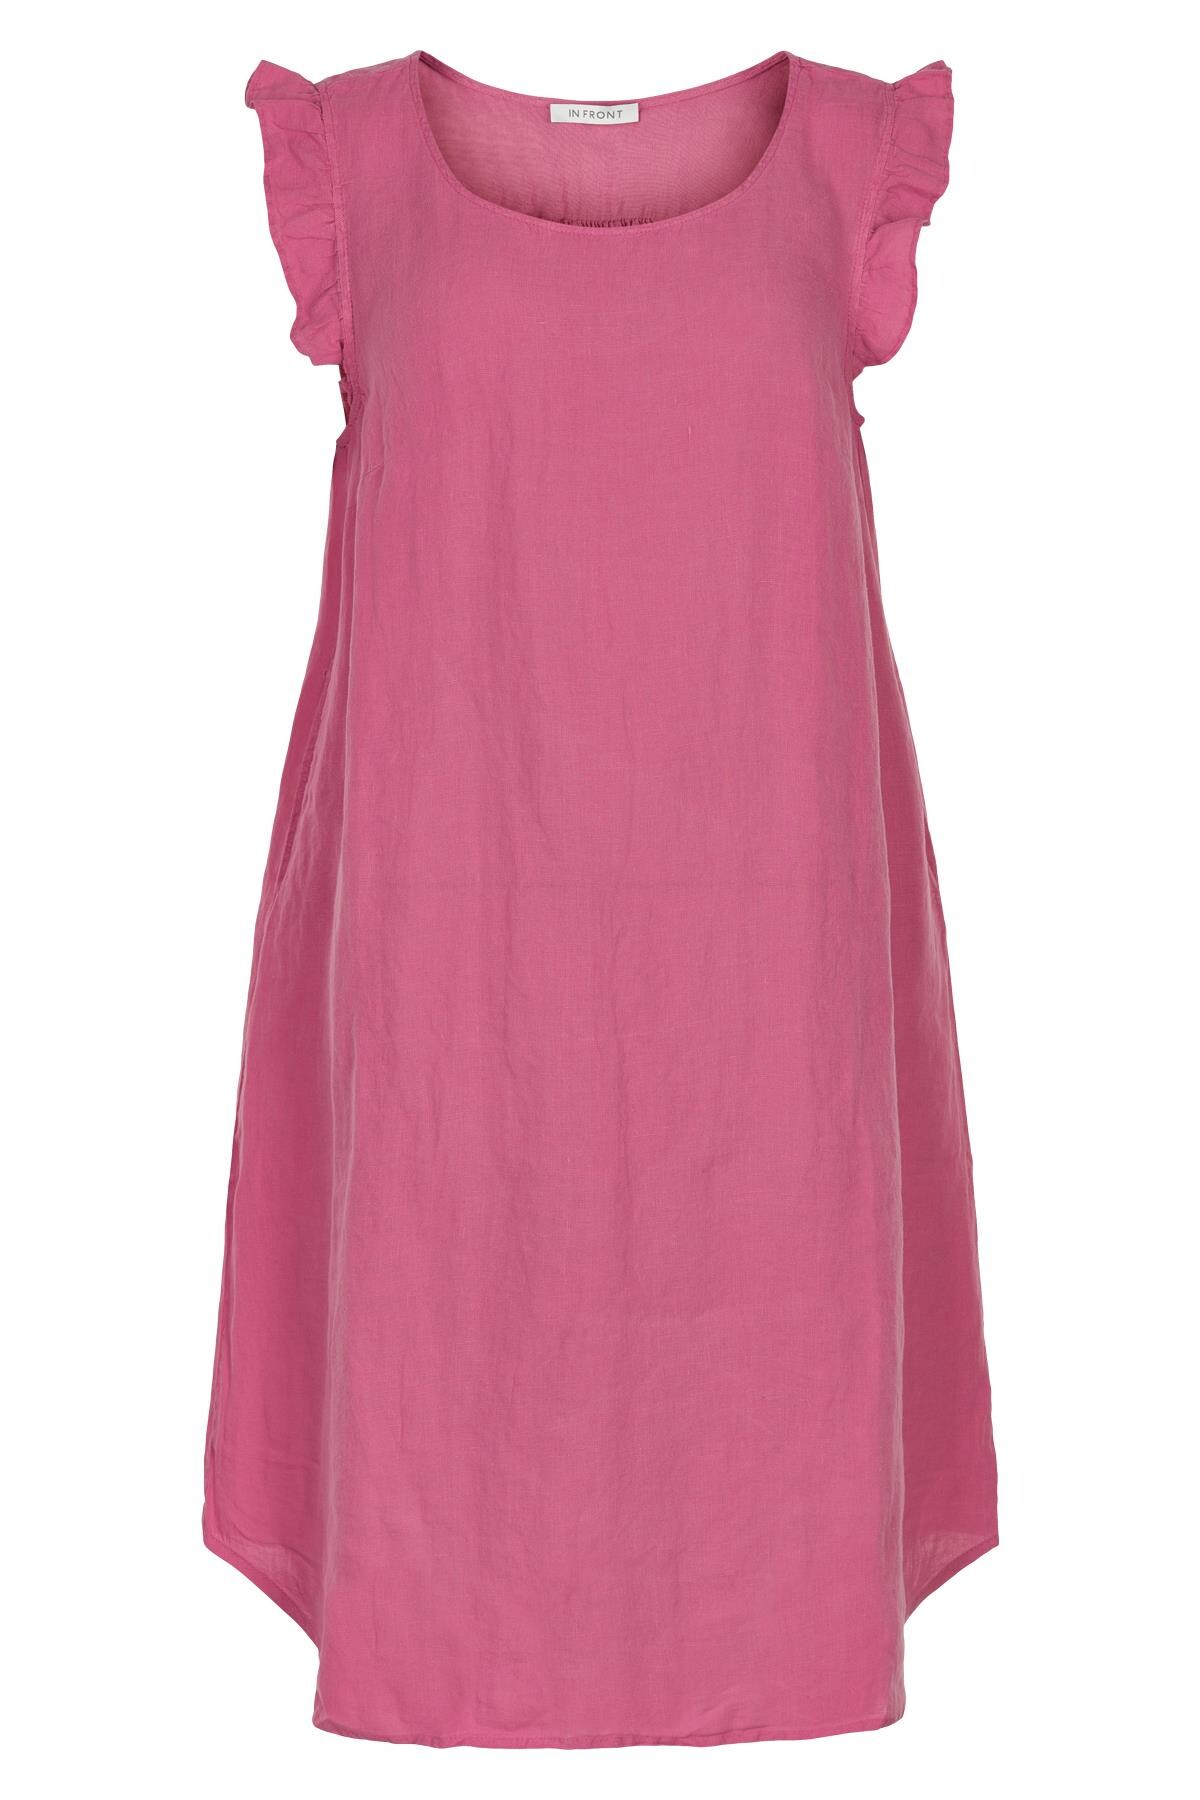 IN FRONT LINO DRESS 15071 221 (Pink 221, L)